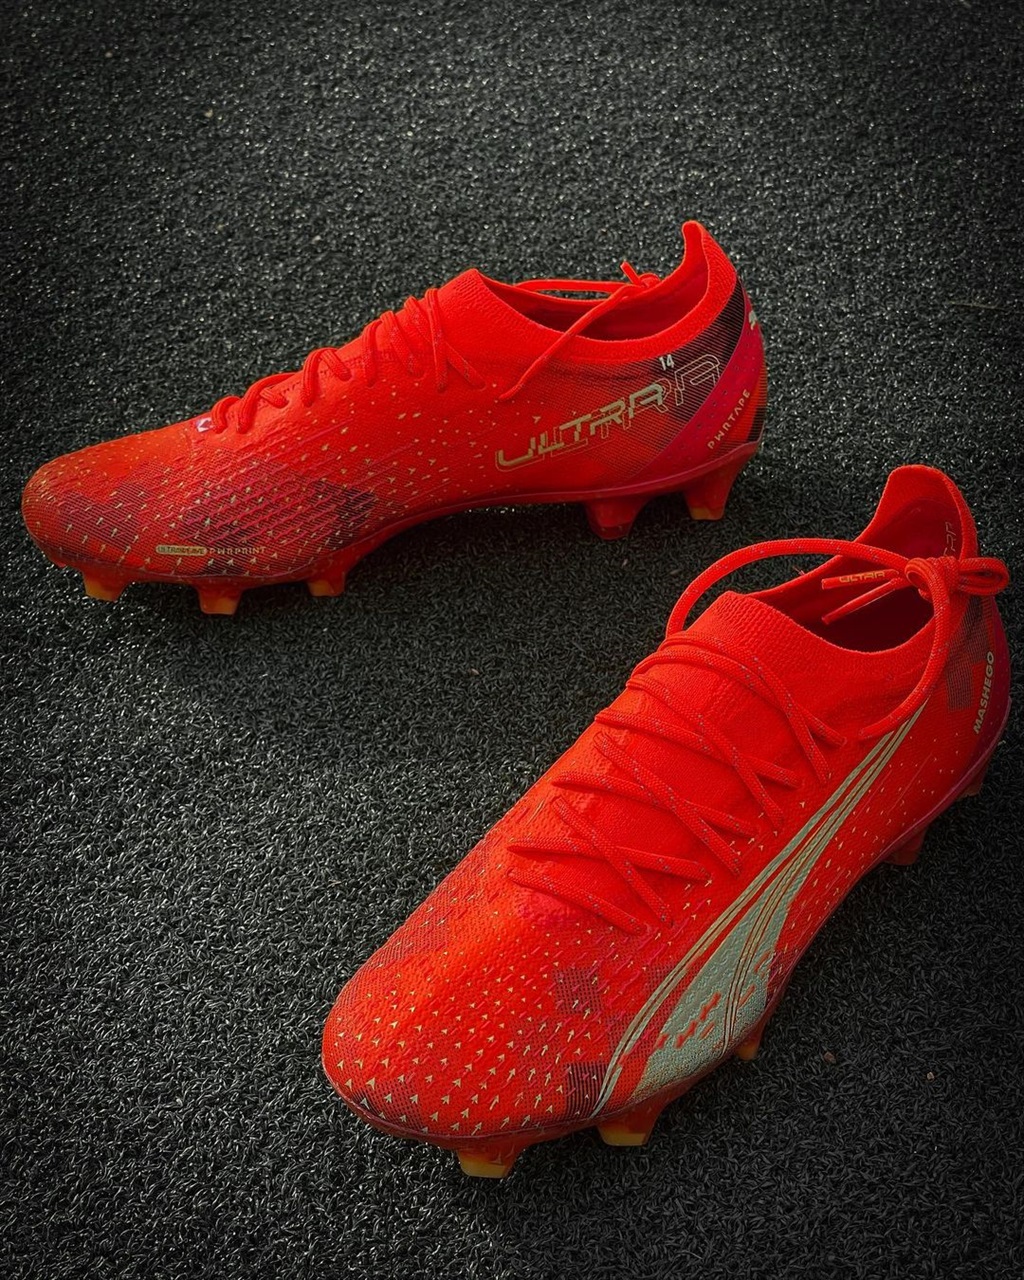 The new PUMA Ultra boots from the Fearless Pack.